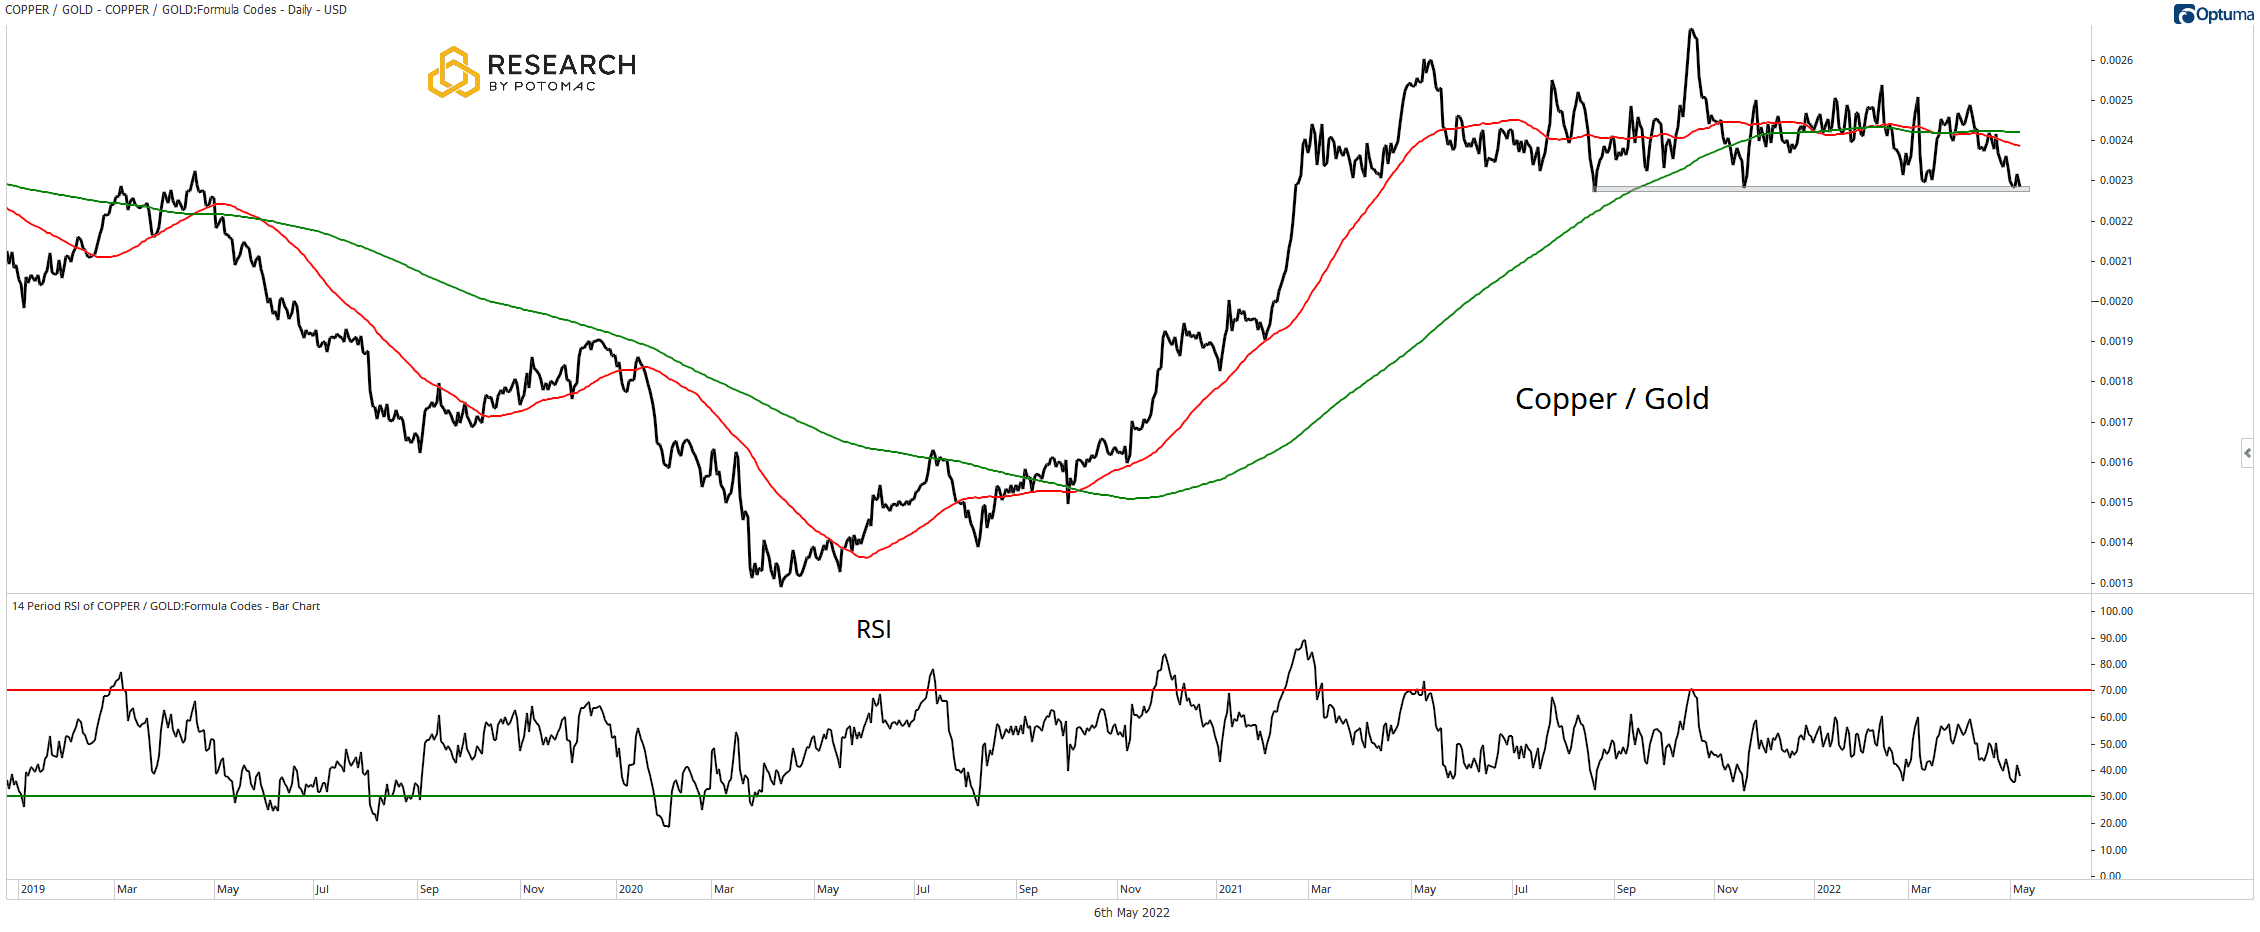 Copper / Gold chart for April 29th research.